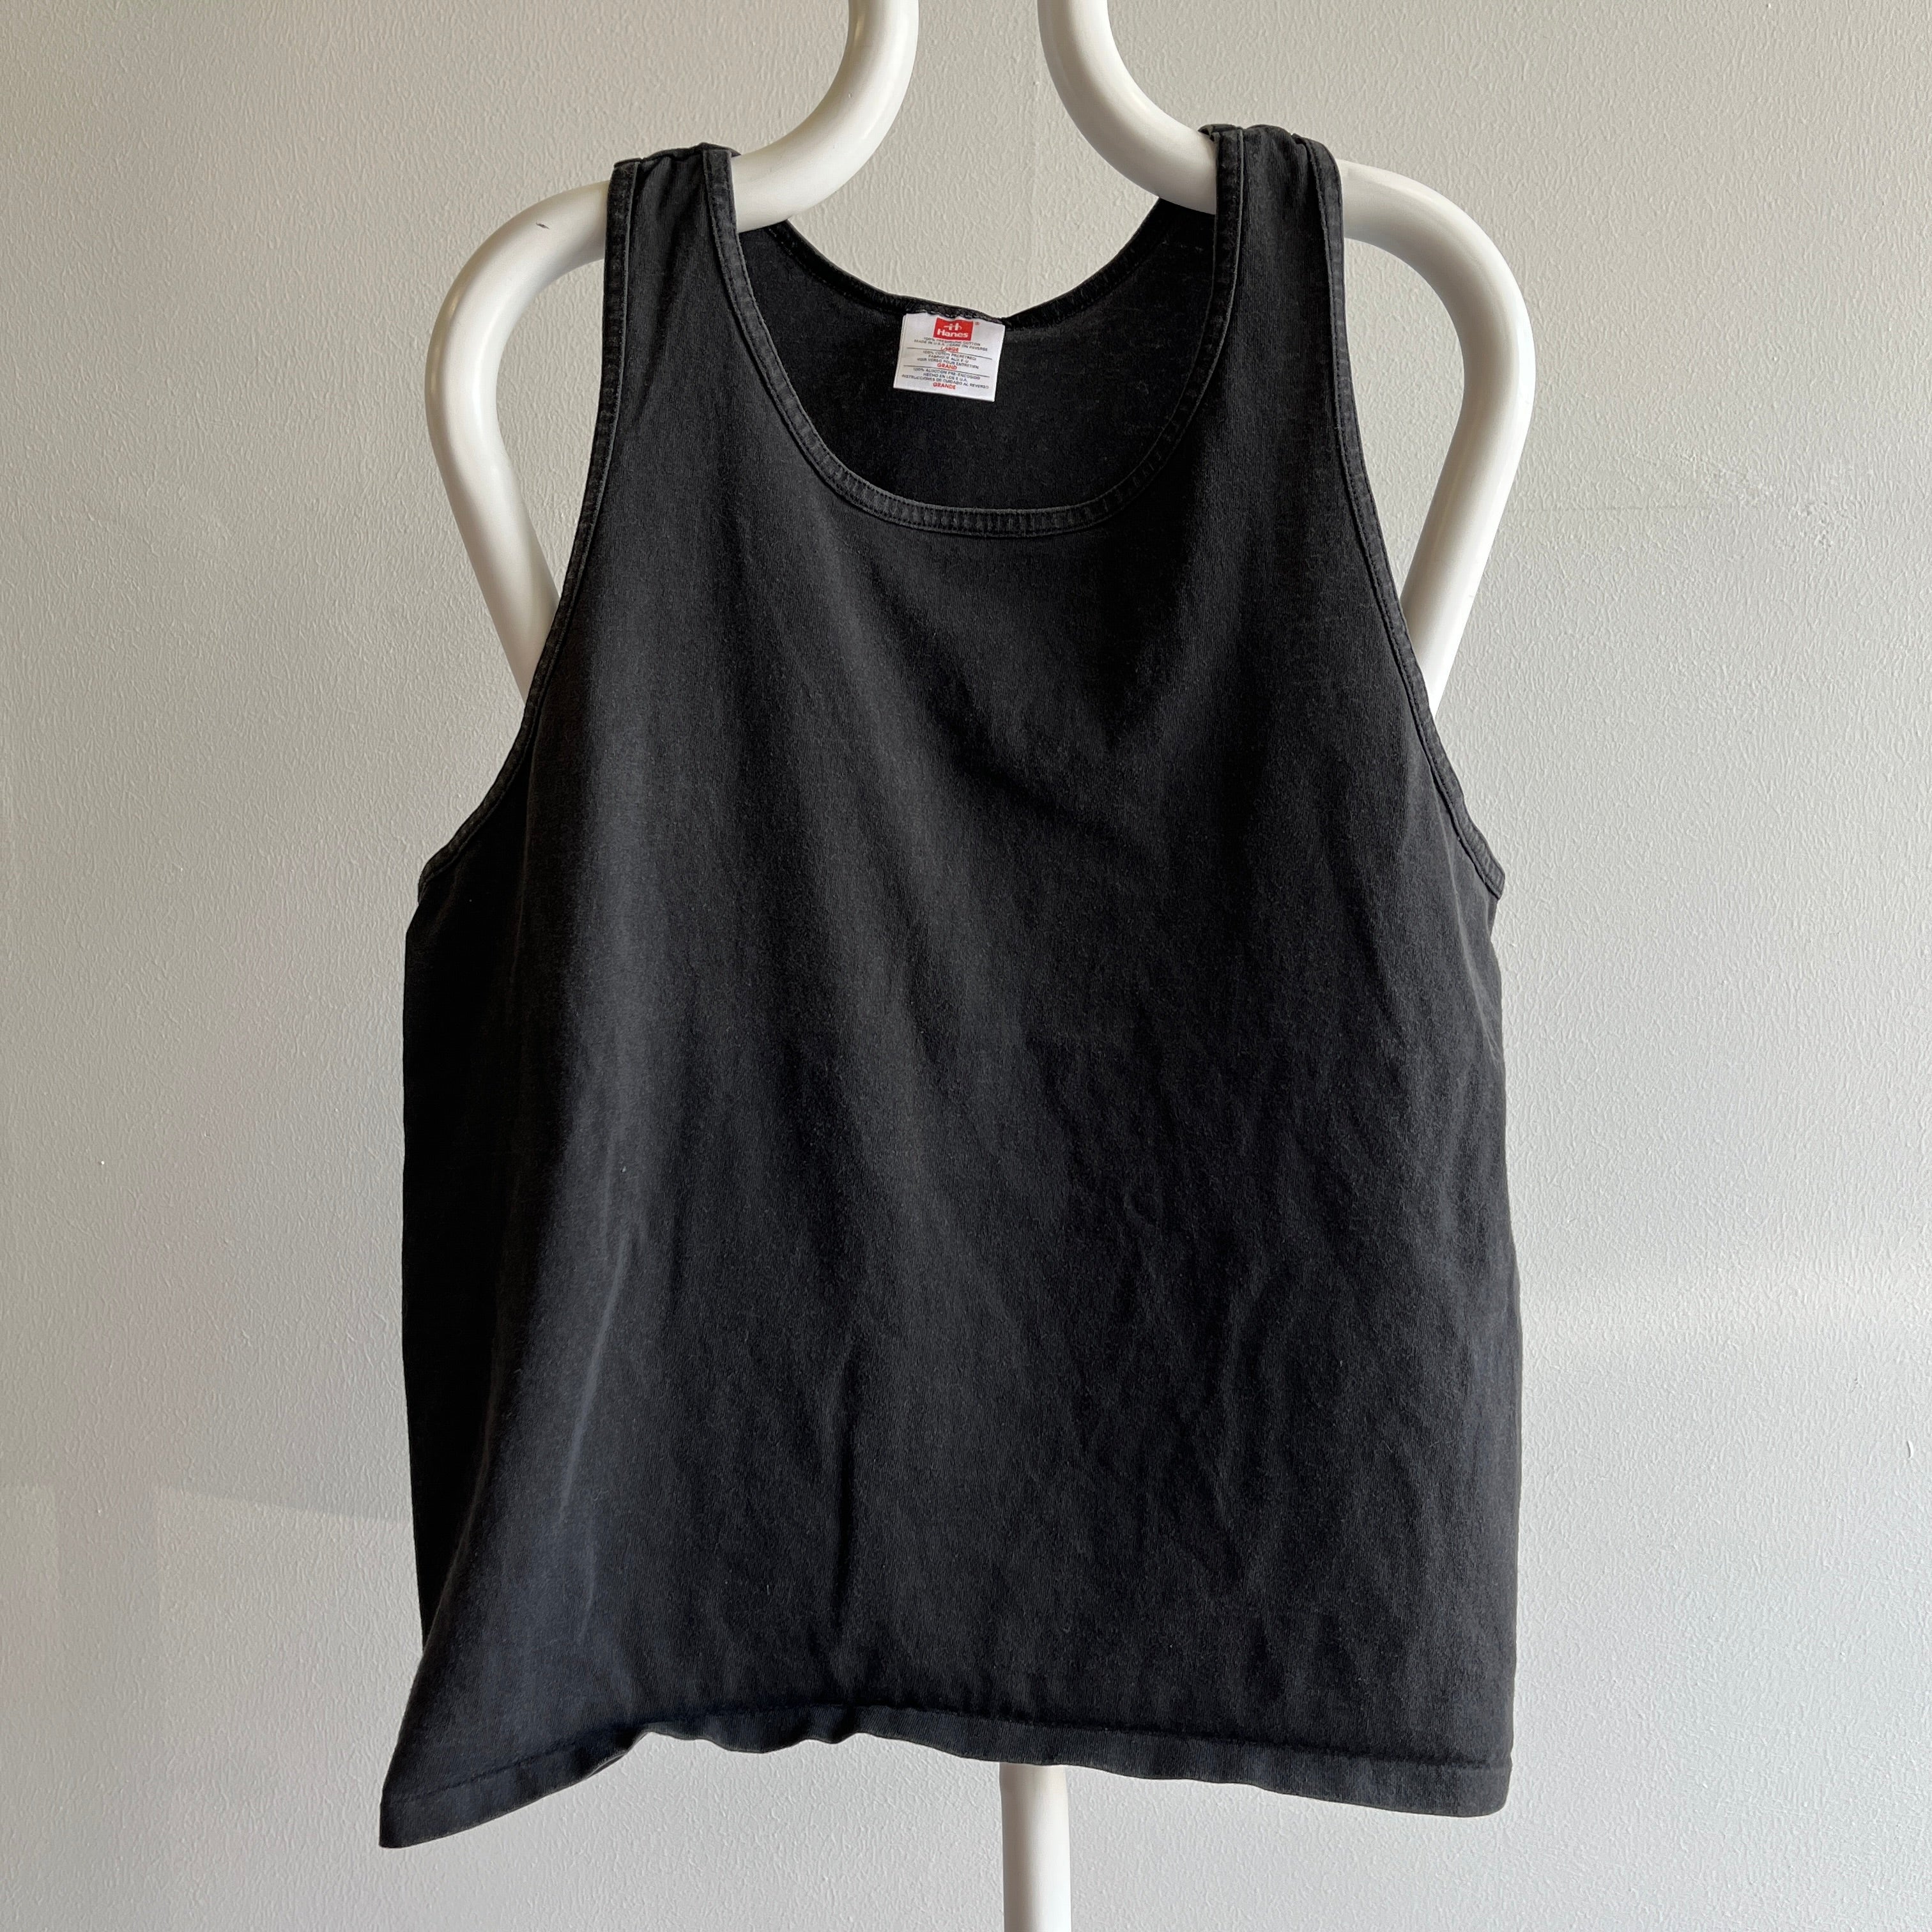 1990s Blank Black Cotton Tank Top by Hanes - Basic Perfection!